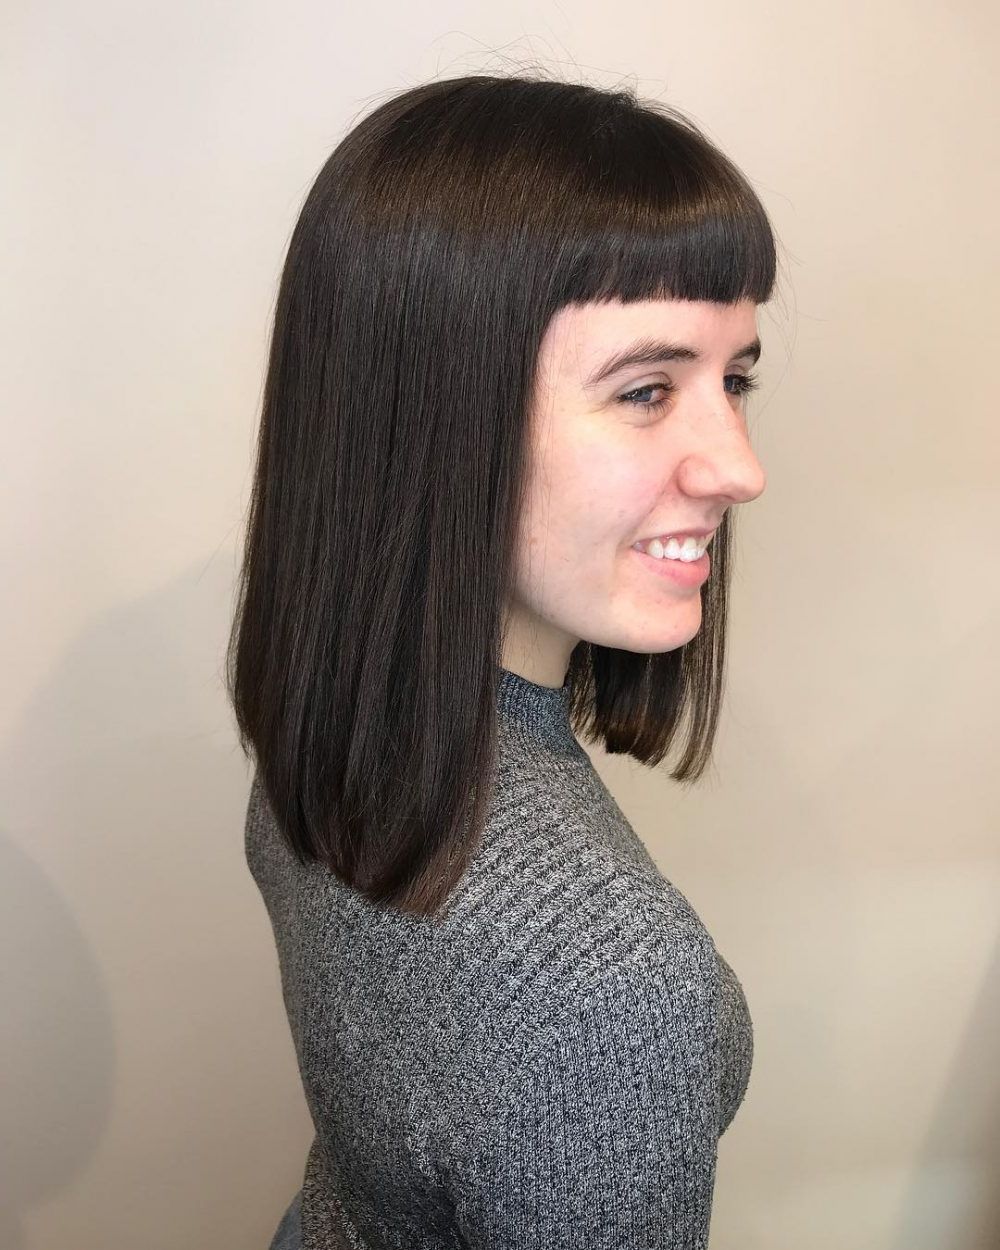 53 Popular Medium Length Hairstyles With Bangs In 2019 Inside Famous Medium Hairstyles With Big Bangs (View 4 of 20)